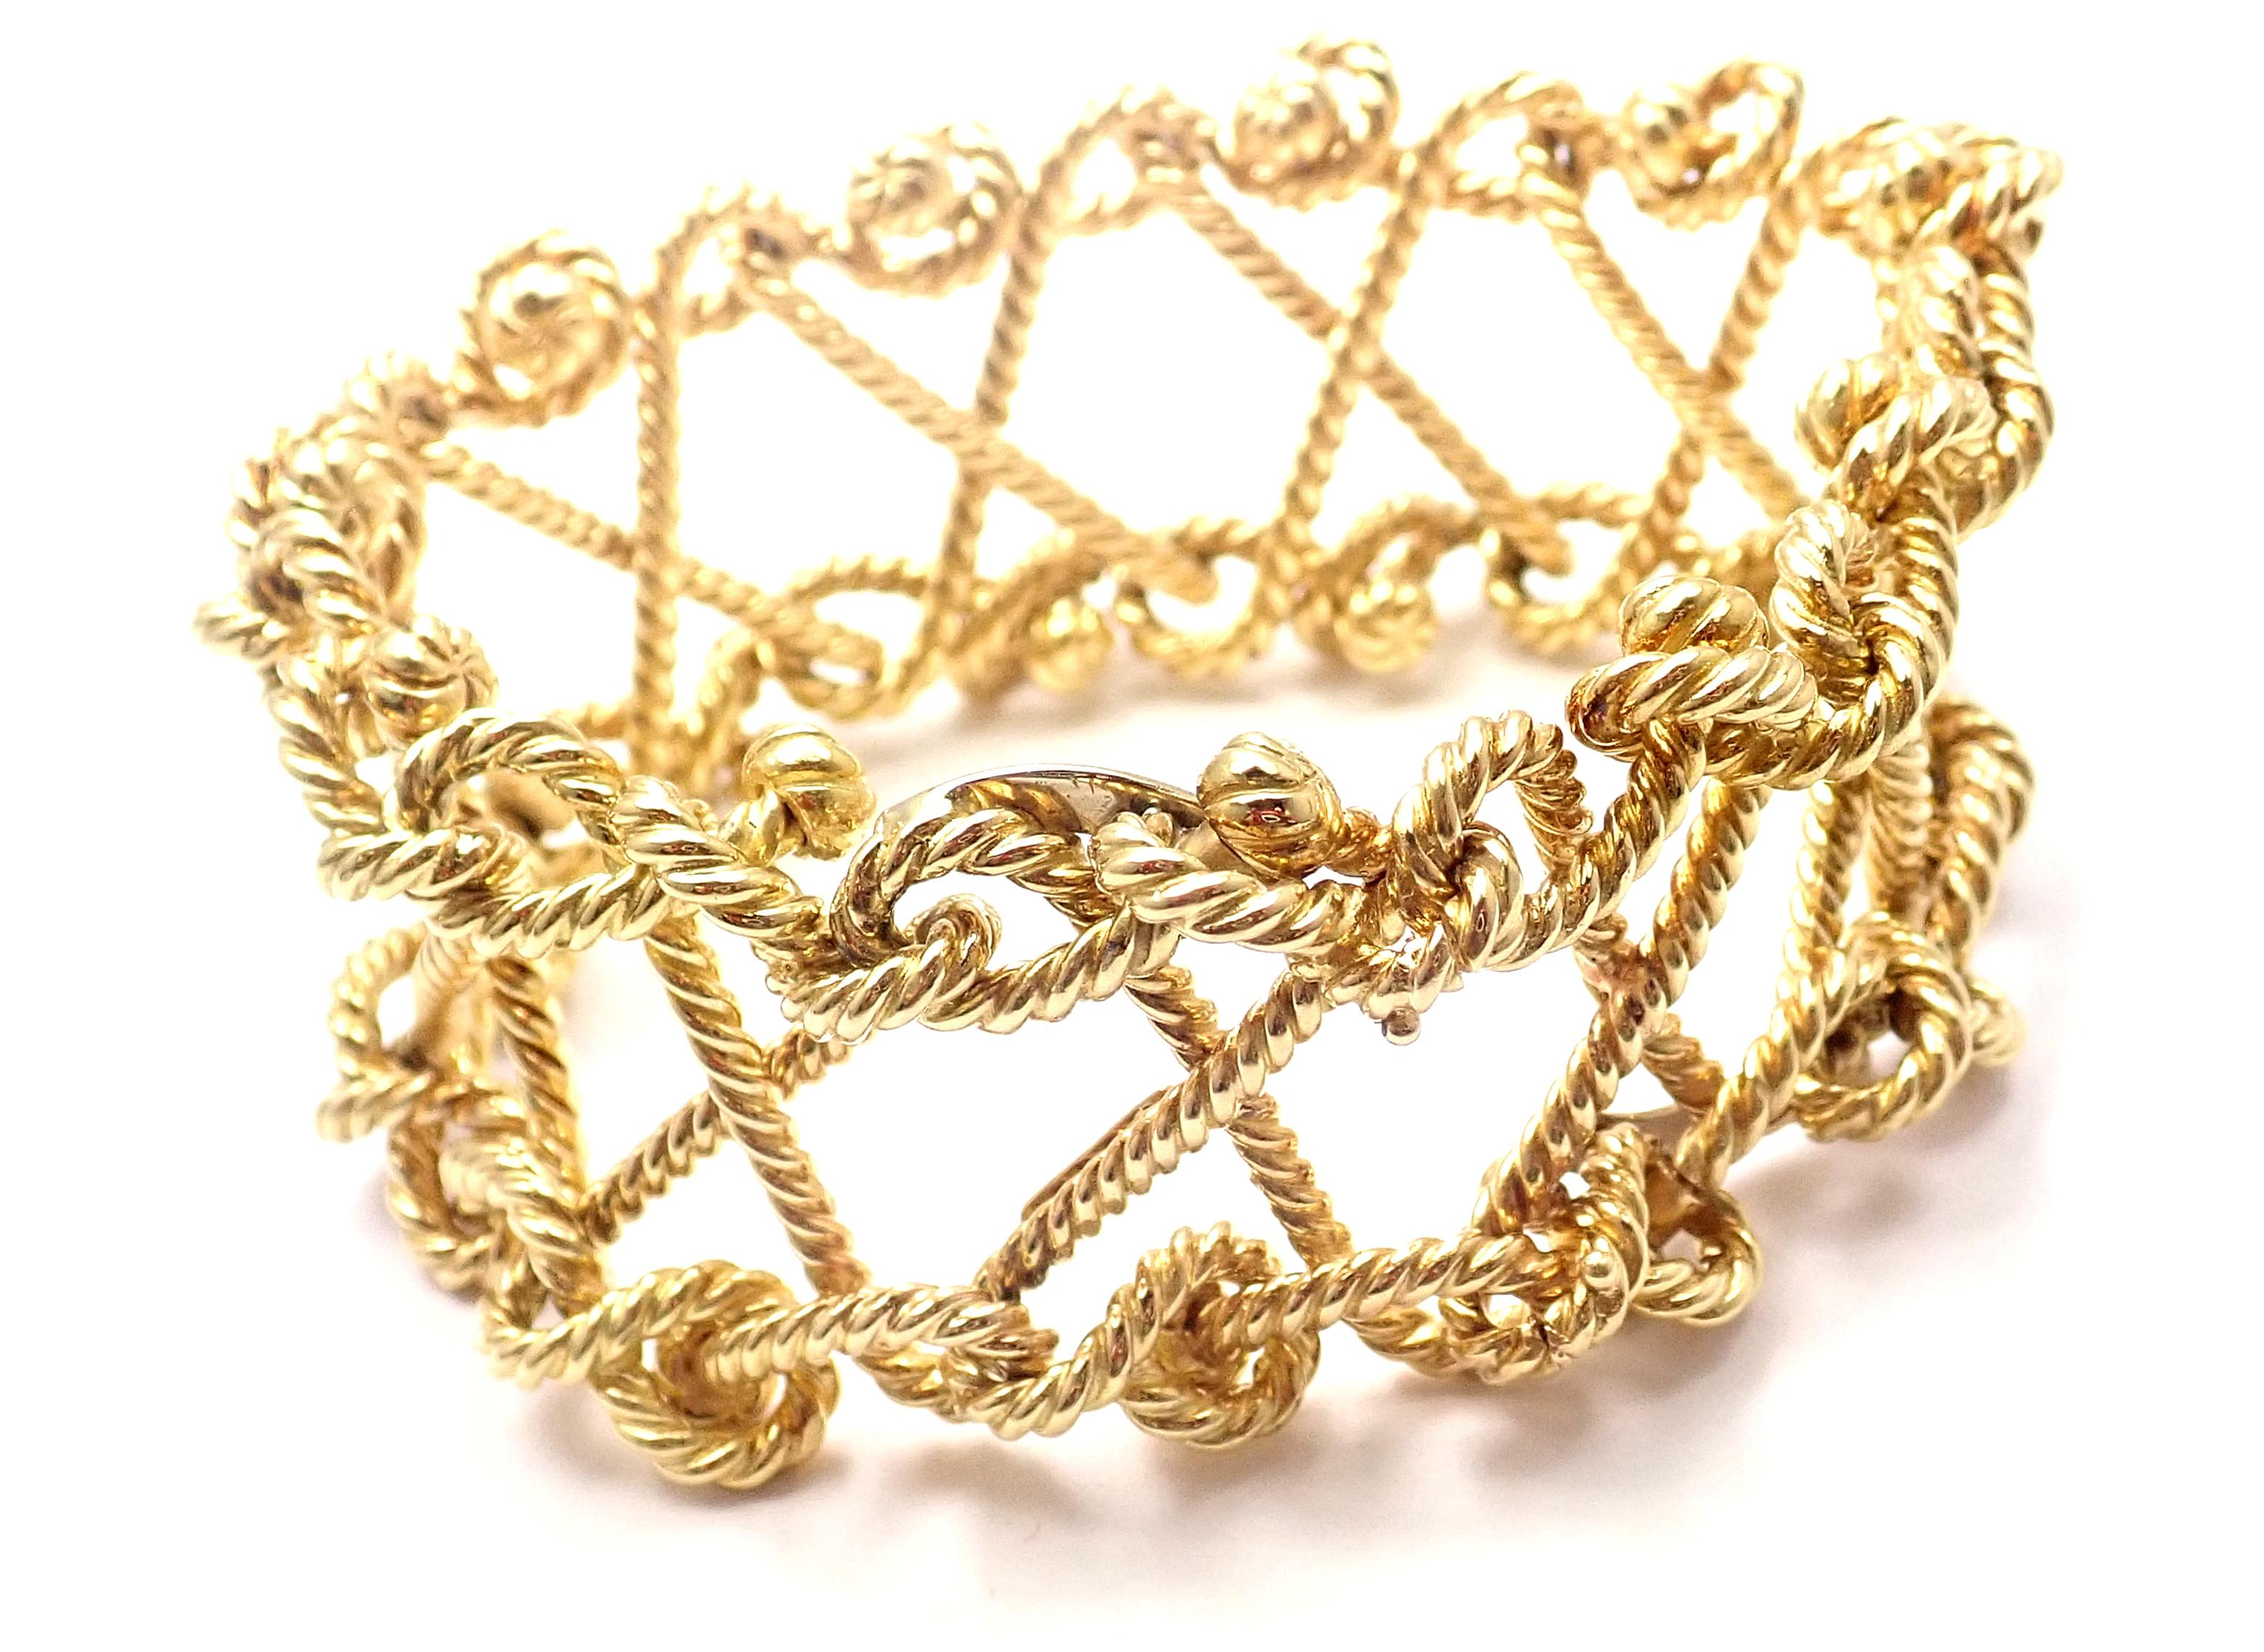 18k Yellow Gold Twisted Rope Openwork Wide Link Bracelet by Verdura. 
Details: 
Weight: 105.9 grams
Width: 1 1/4